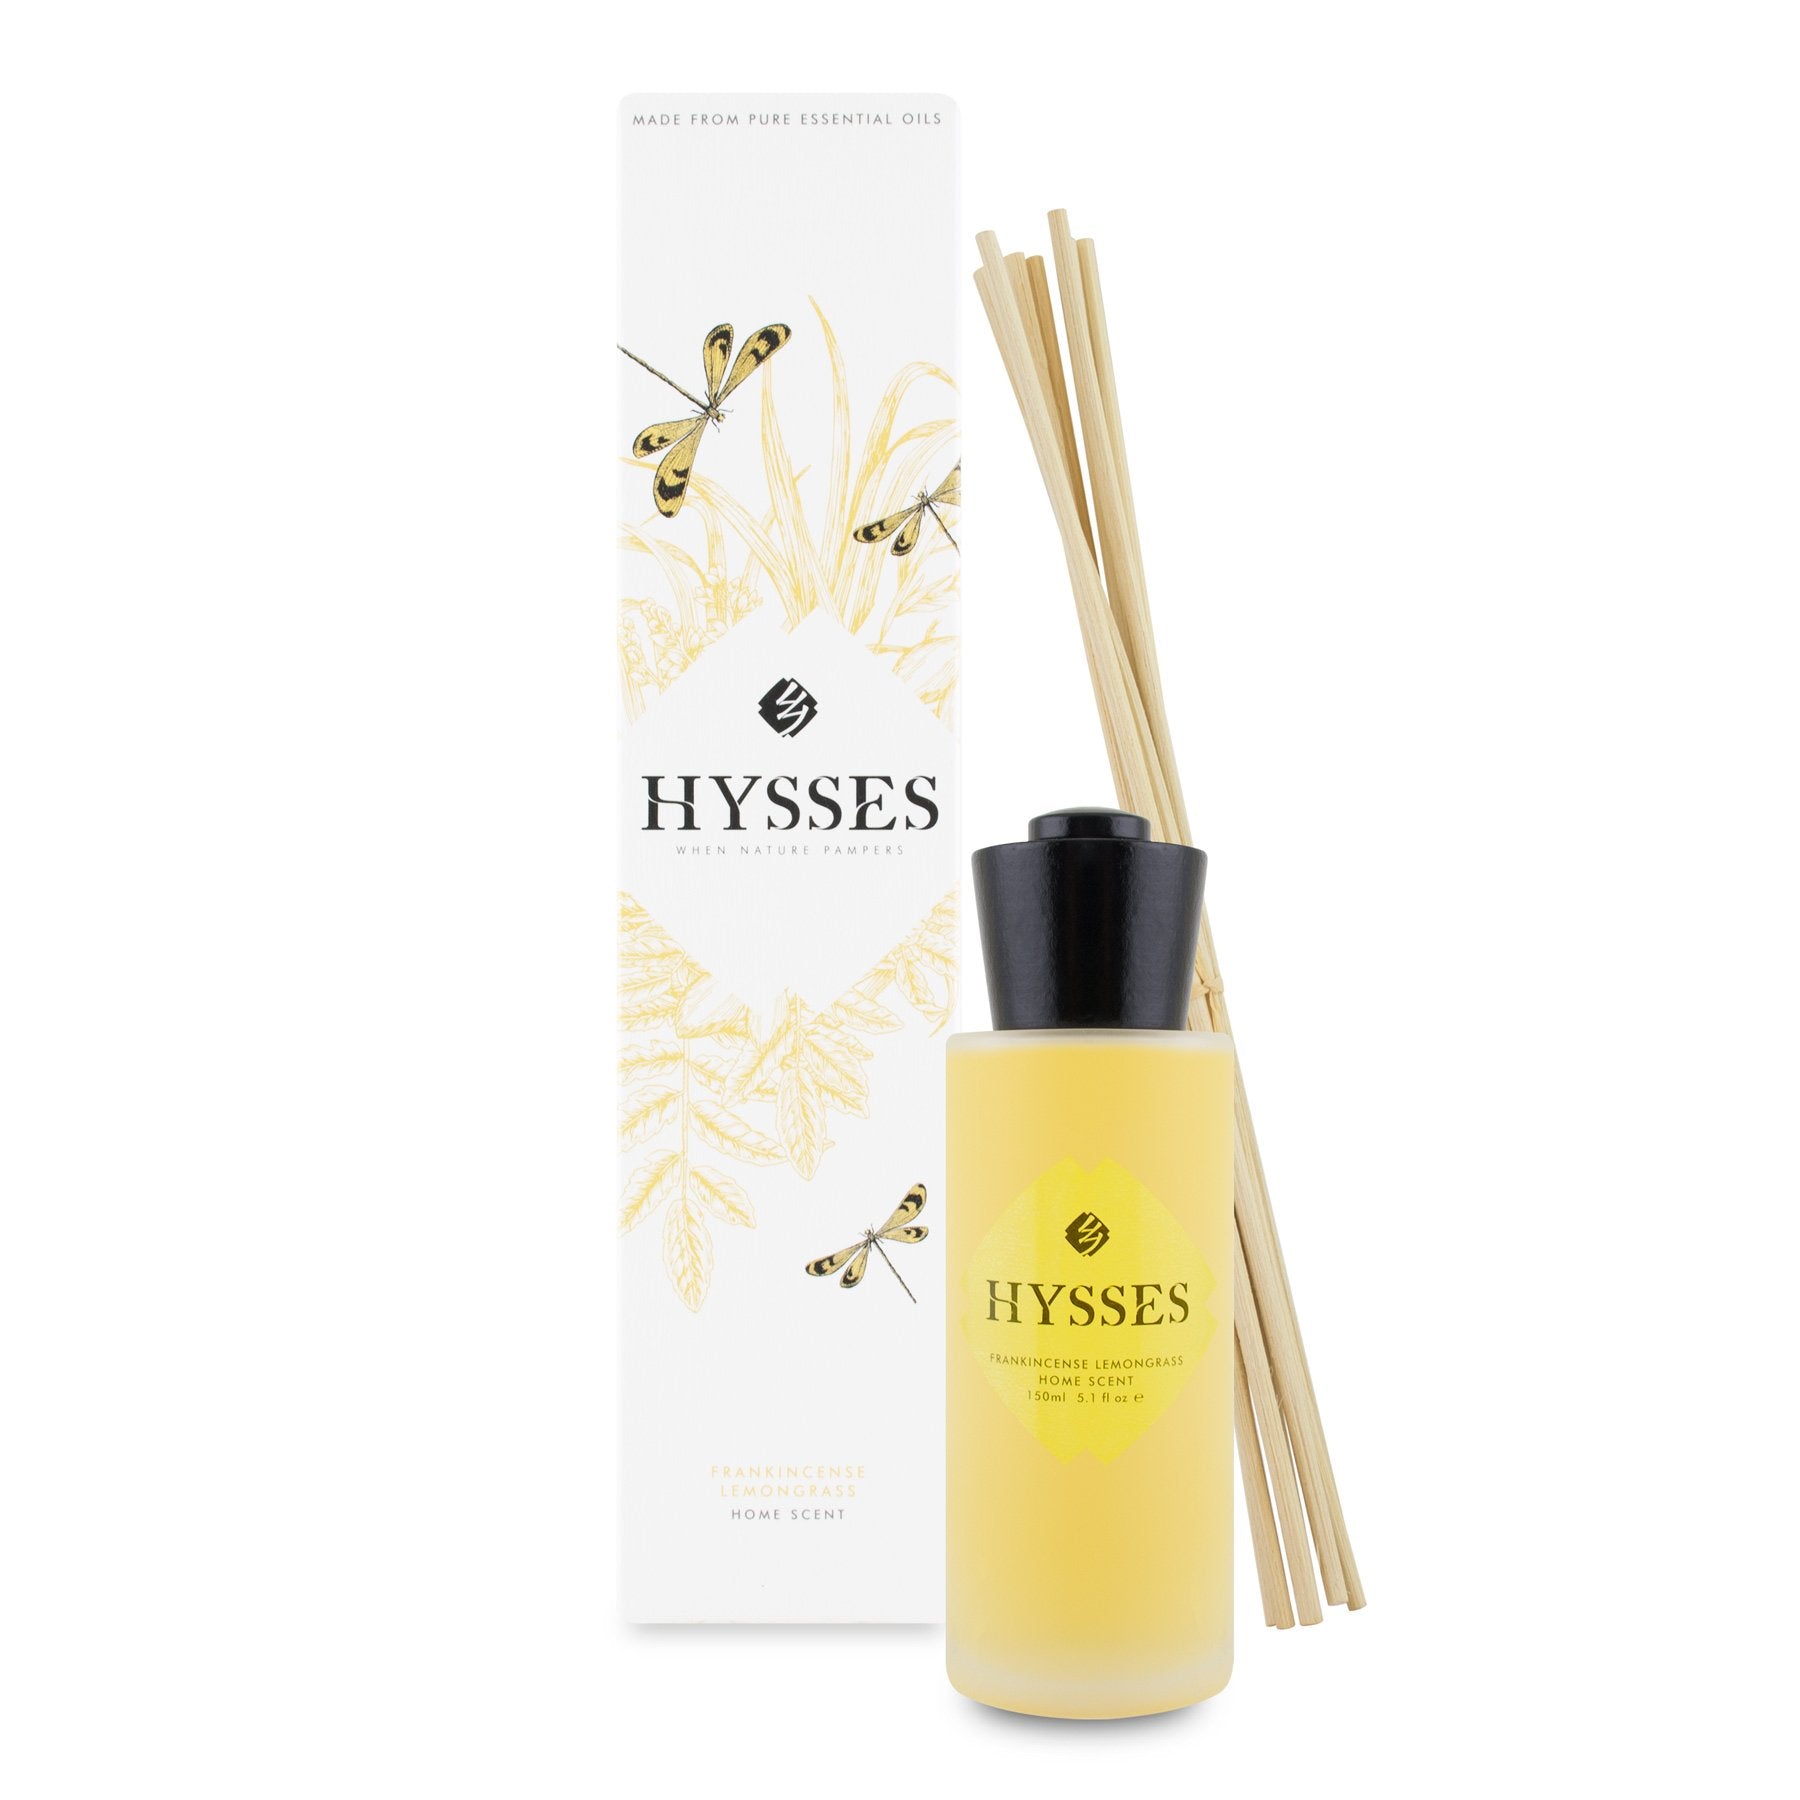 Photo of Home Scent Diffuser - Frankincense Lemongrass